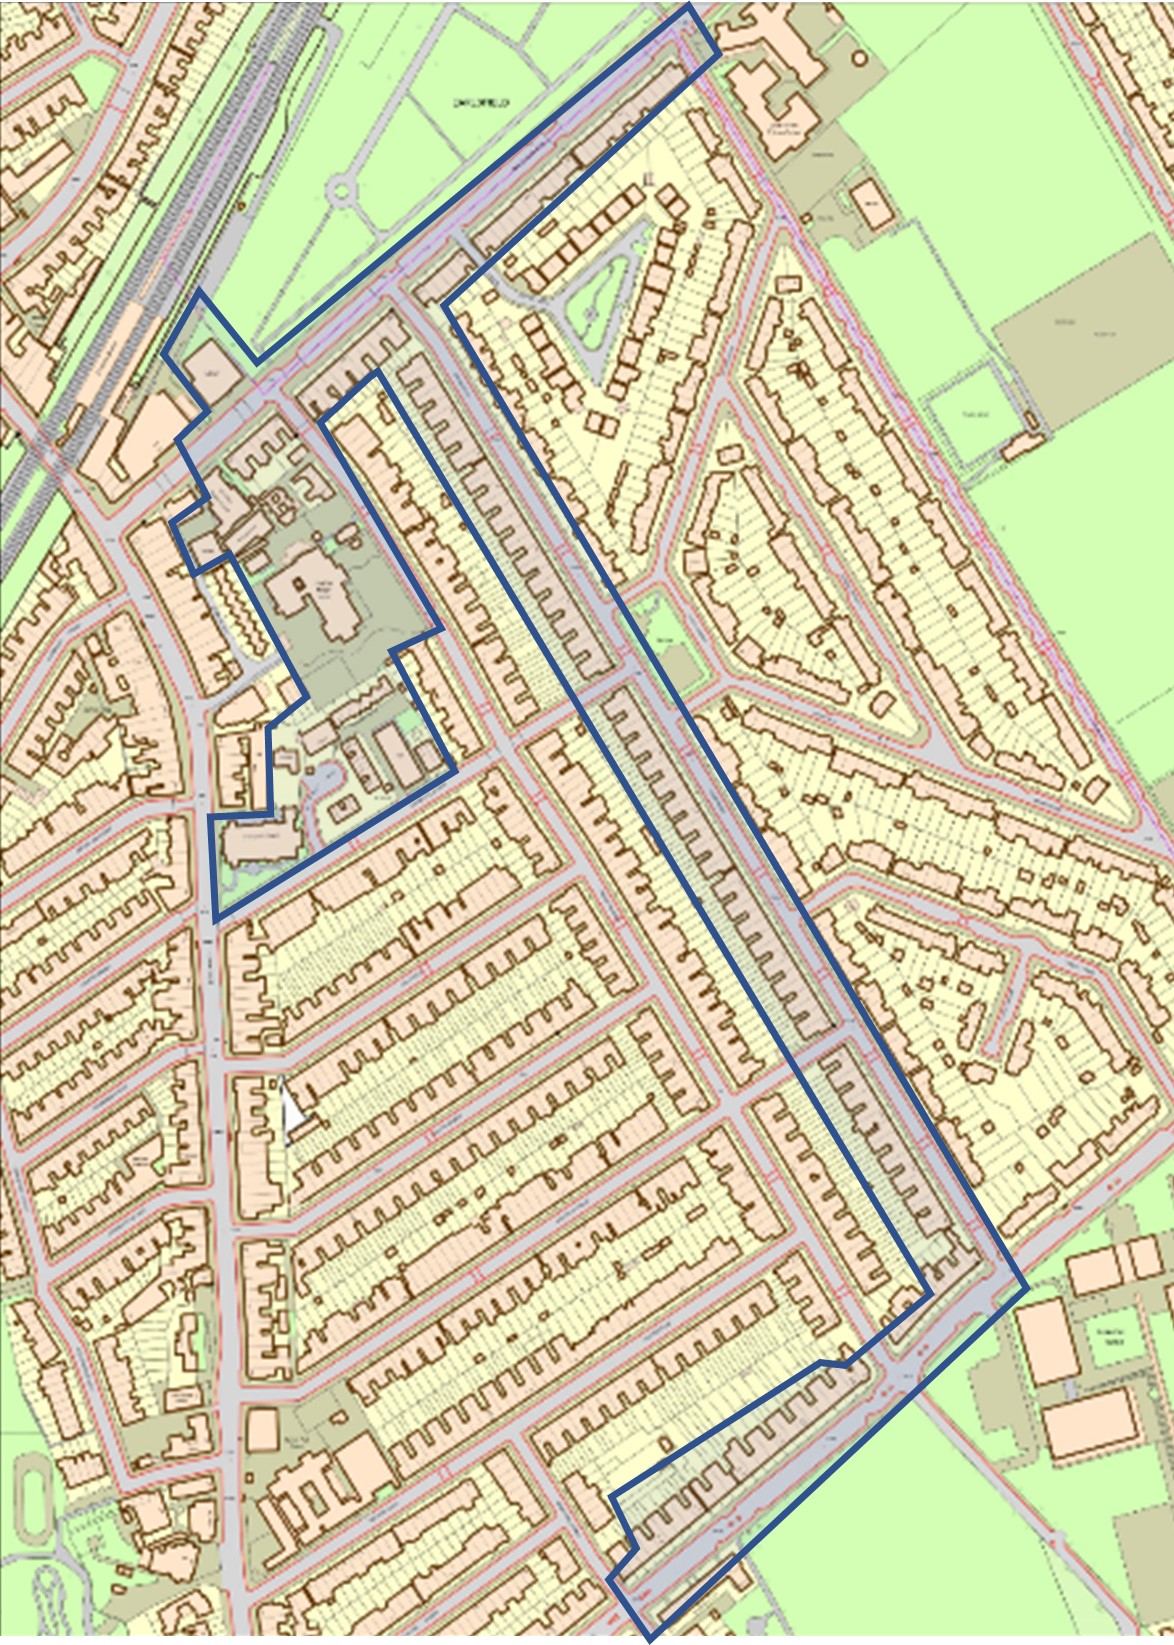 Fig. 24: The Holloway brothers private housing and Western area